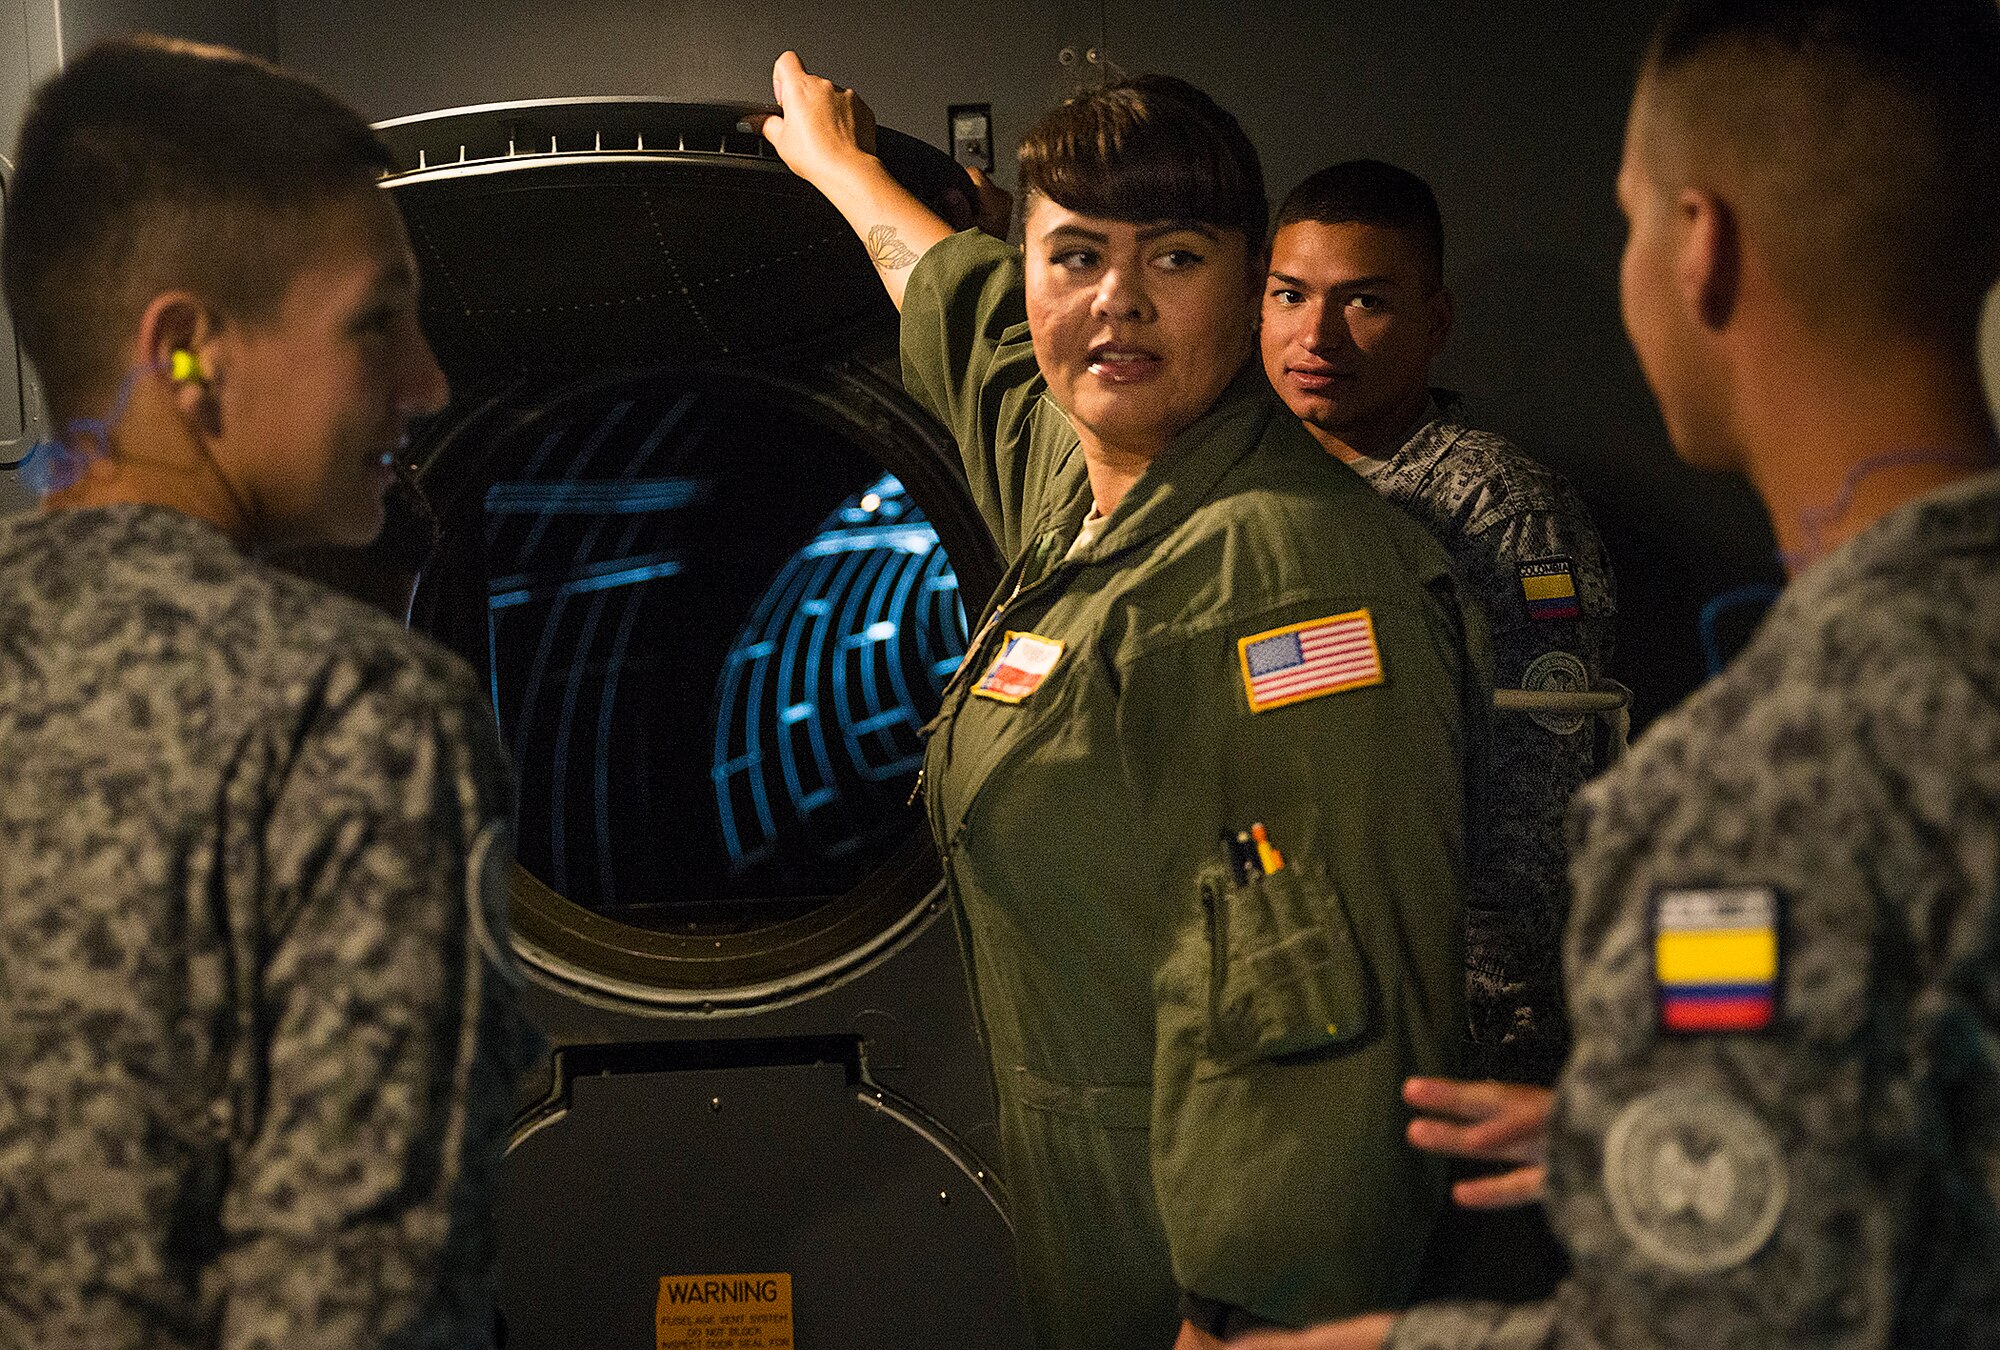 Staff Sgt. Crystal McKerracher, a 68th Airlift Squadron flight engineer, shows students from the Inter-American Air Forces Academy the tail compartment of the C-5M Super Galaxy aircraft March 29, 2017 at Joint Base San Antonio-Lackland, Texas. As part of their tour the students also toured the structural, metals,  survival, and engine shops.  (U.S. Air Force photo by Benjamin Faske)